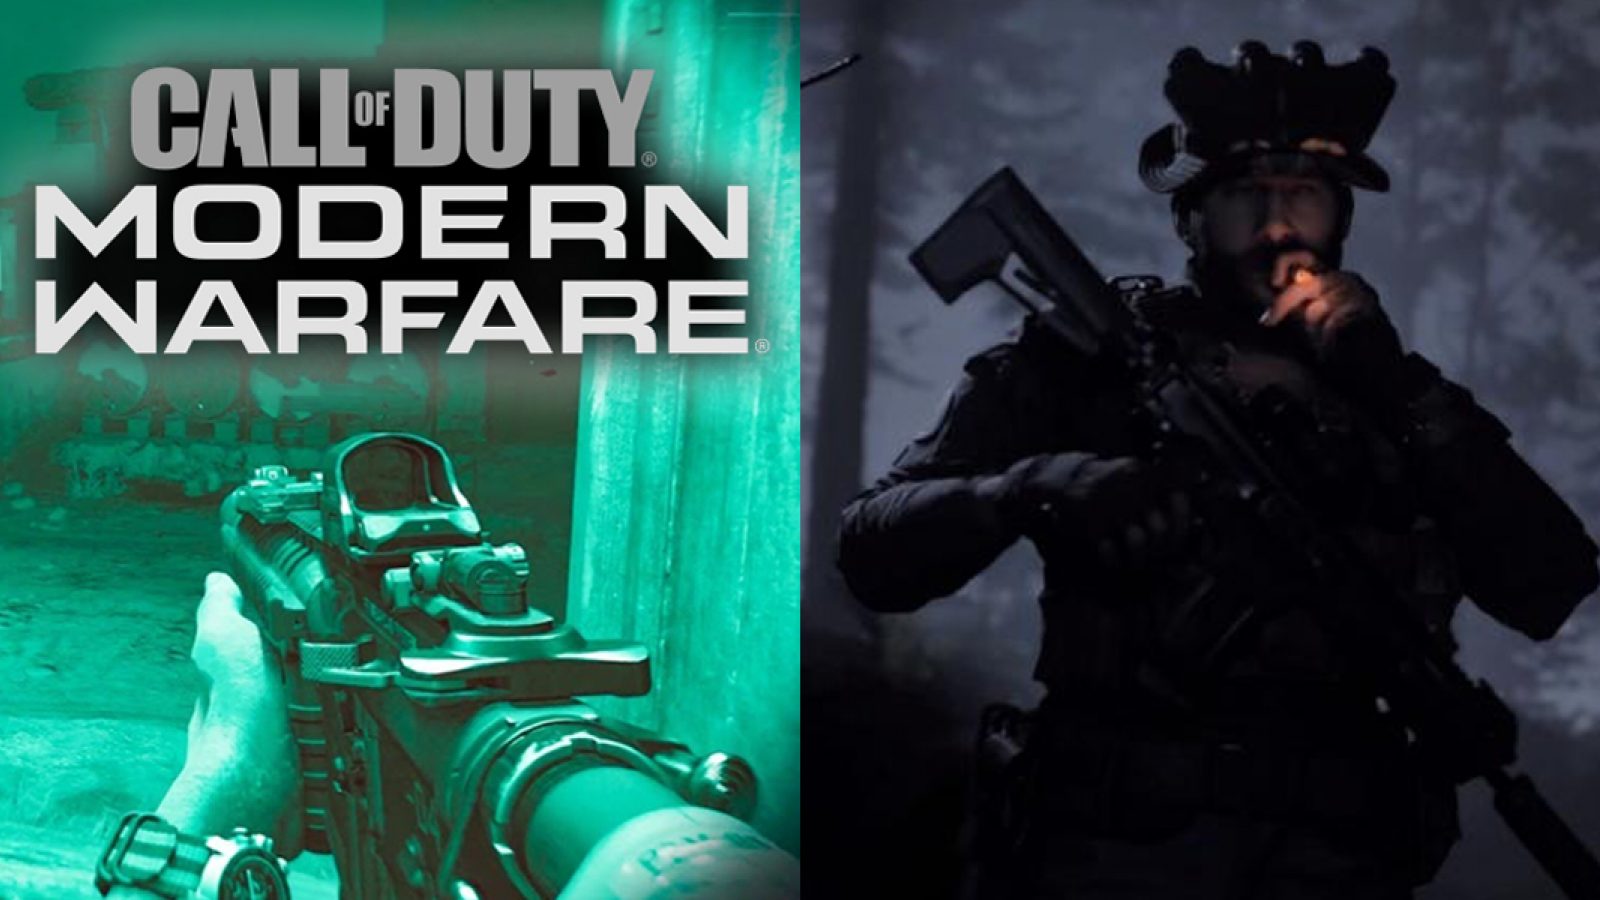 Modern Warfare 2 players want Infinity Ward to steal Perk system from CoD  Ghosts - Charlie INTEL